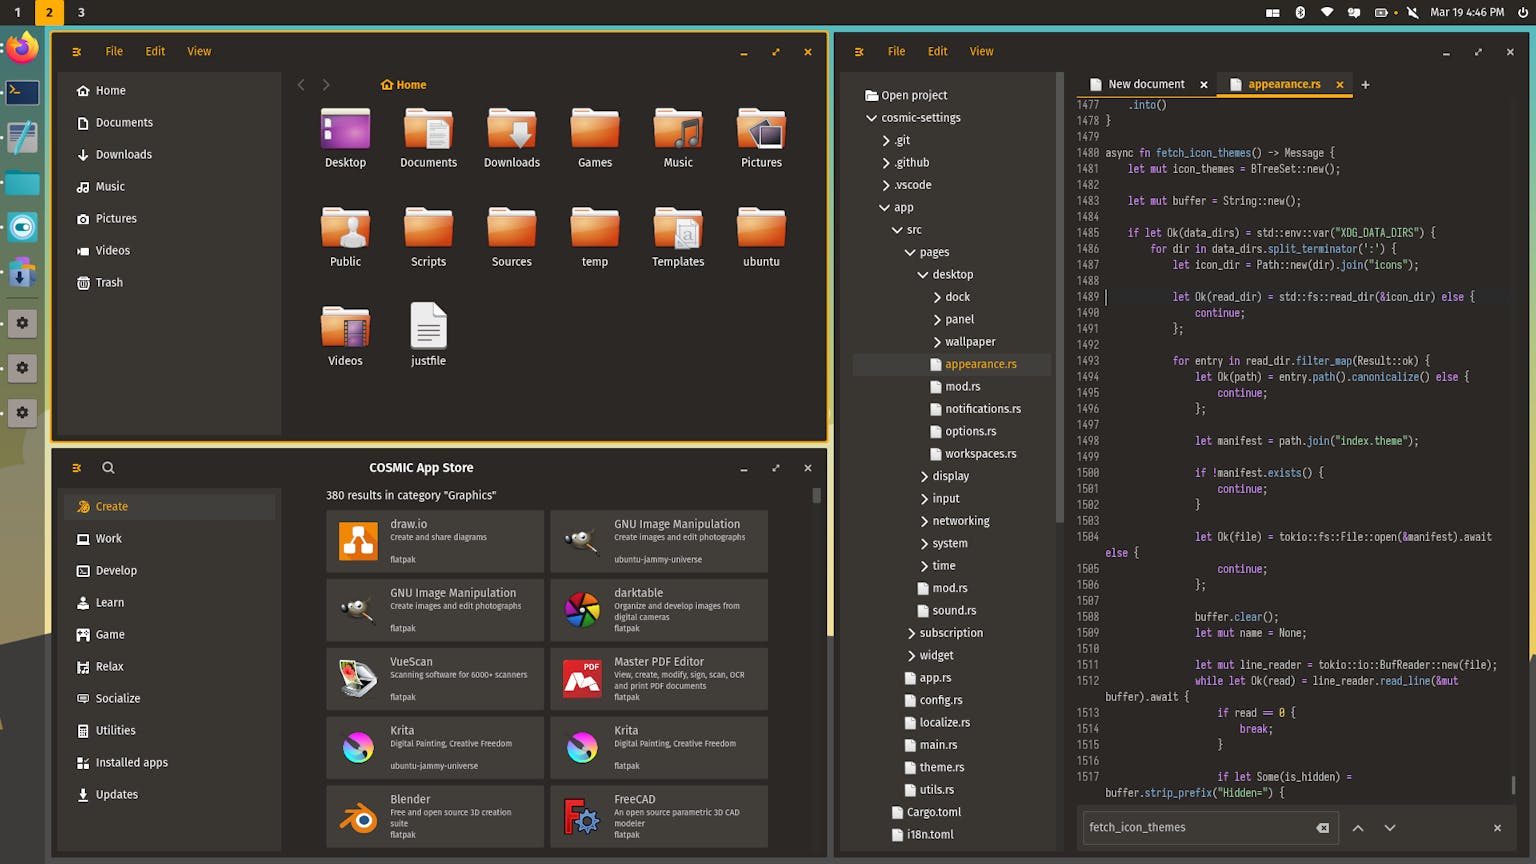 The COSMIC icon theme was changed to Humanity, as evidenced by the orange icons in COSMIC Files. This is also applied to GTK applications.